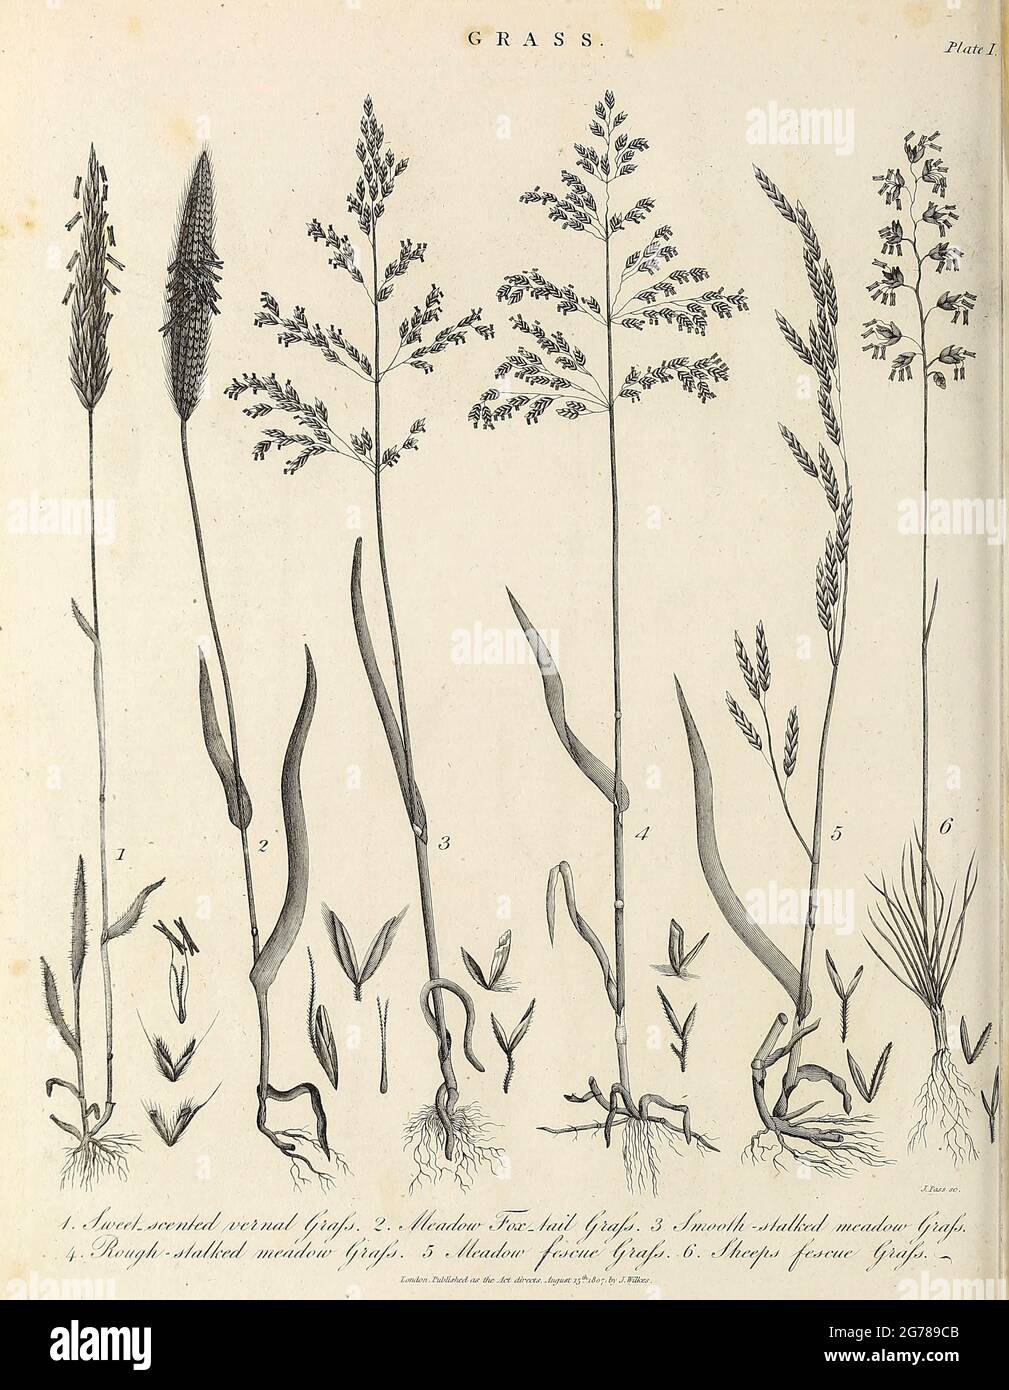 Various types of Grass Copperplate engraving From the Encyclopaedia Londinensis or, Universal dictionary of arts, sciences, and literature; Volume VIII;  Edited by Wilkes, John. Published in London in 1810. Stock Photo